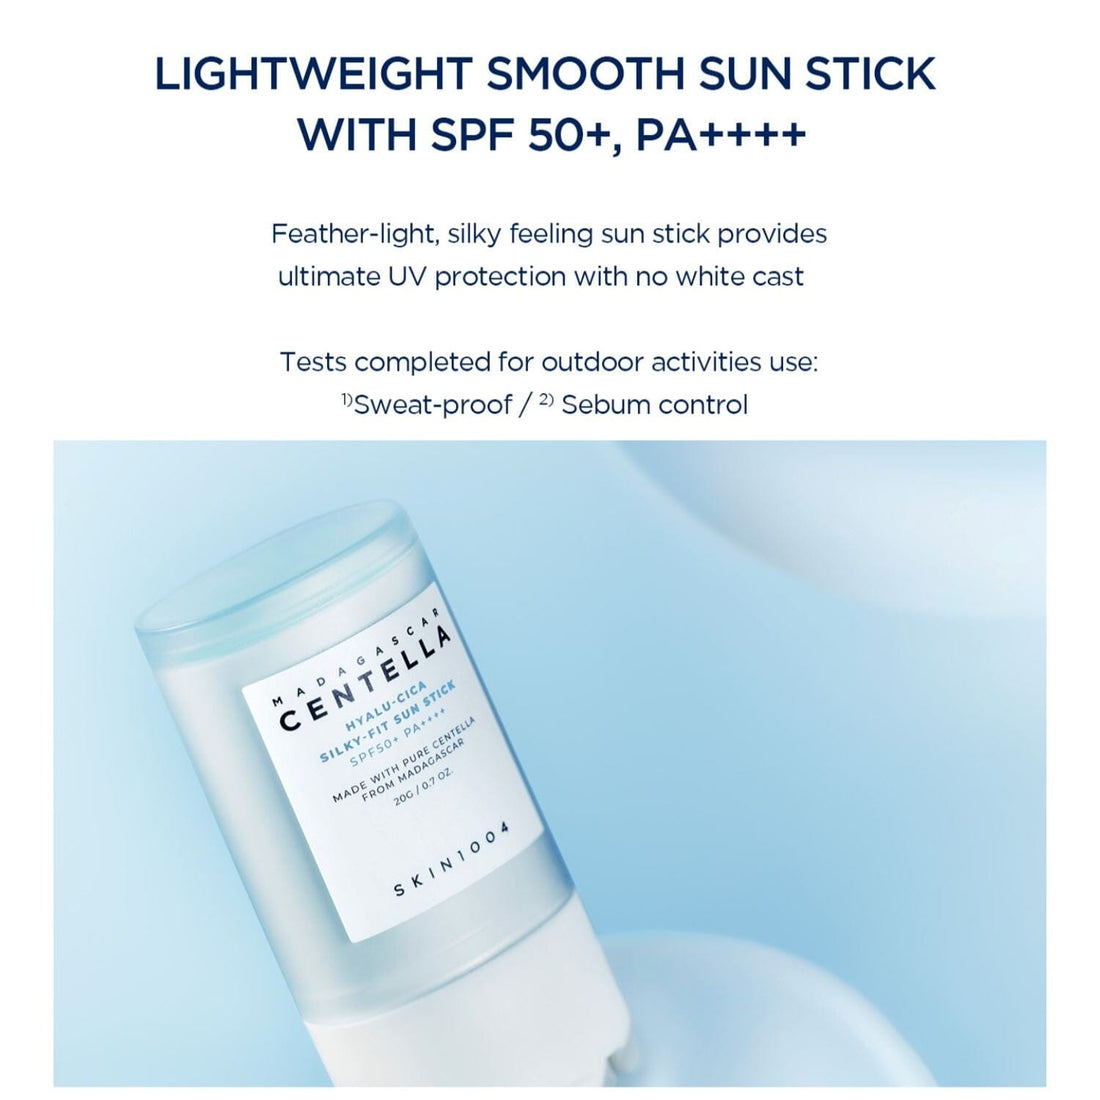 SKIN1004 Madagascar Centella Hyalu-Cica Silky Fit Sun Stick SPF 50+ PA++++, at Orion Beauty. SKIN1004 Official Sole Authorized Retailer in Sri Lanka!